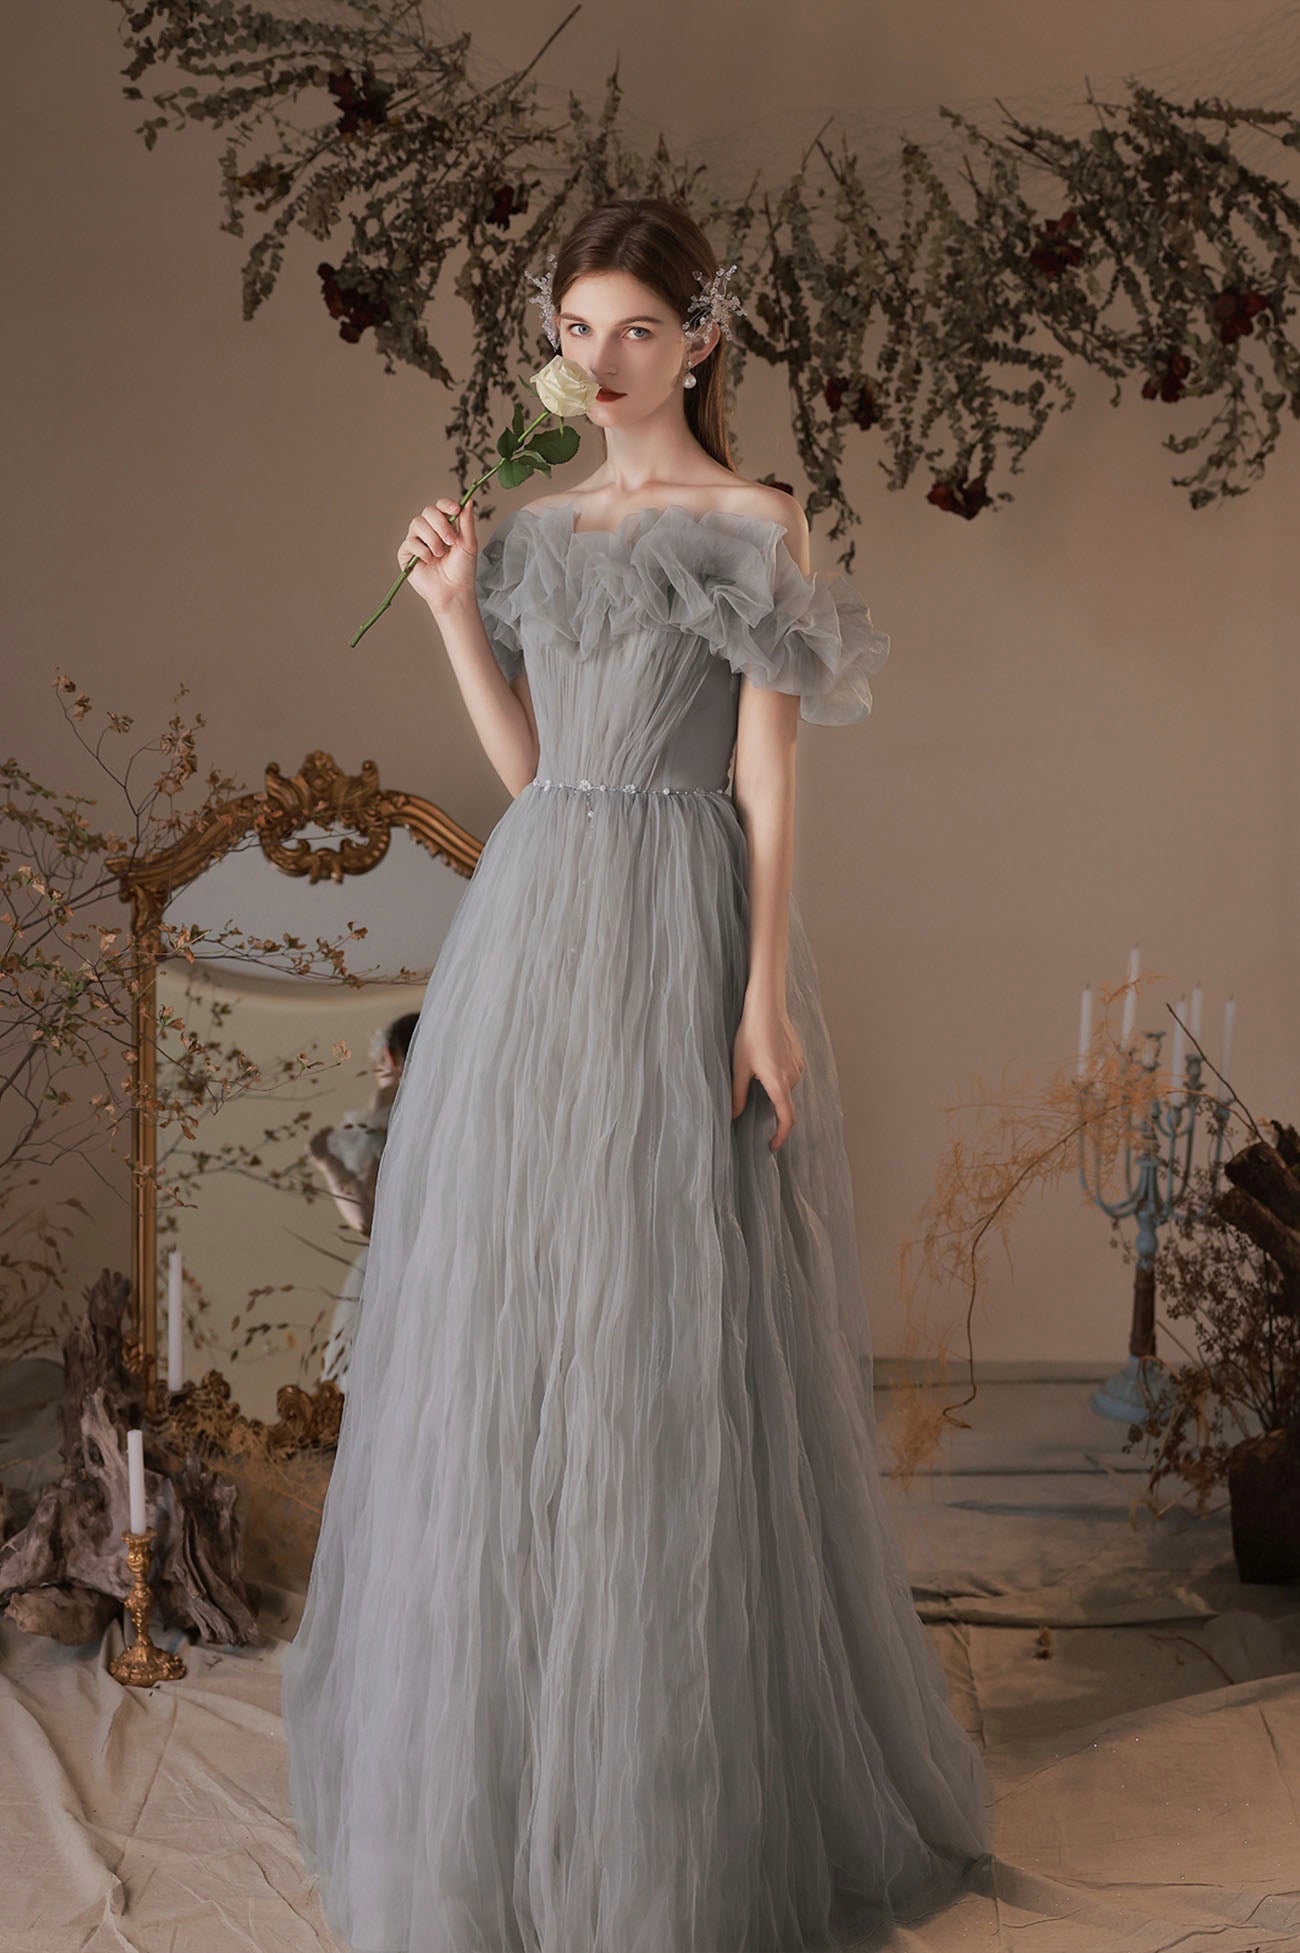 Gray Tulle Long A-Line Prom Dress, Off the Shoulder Formal Evening Dress